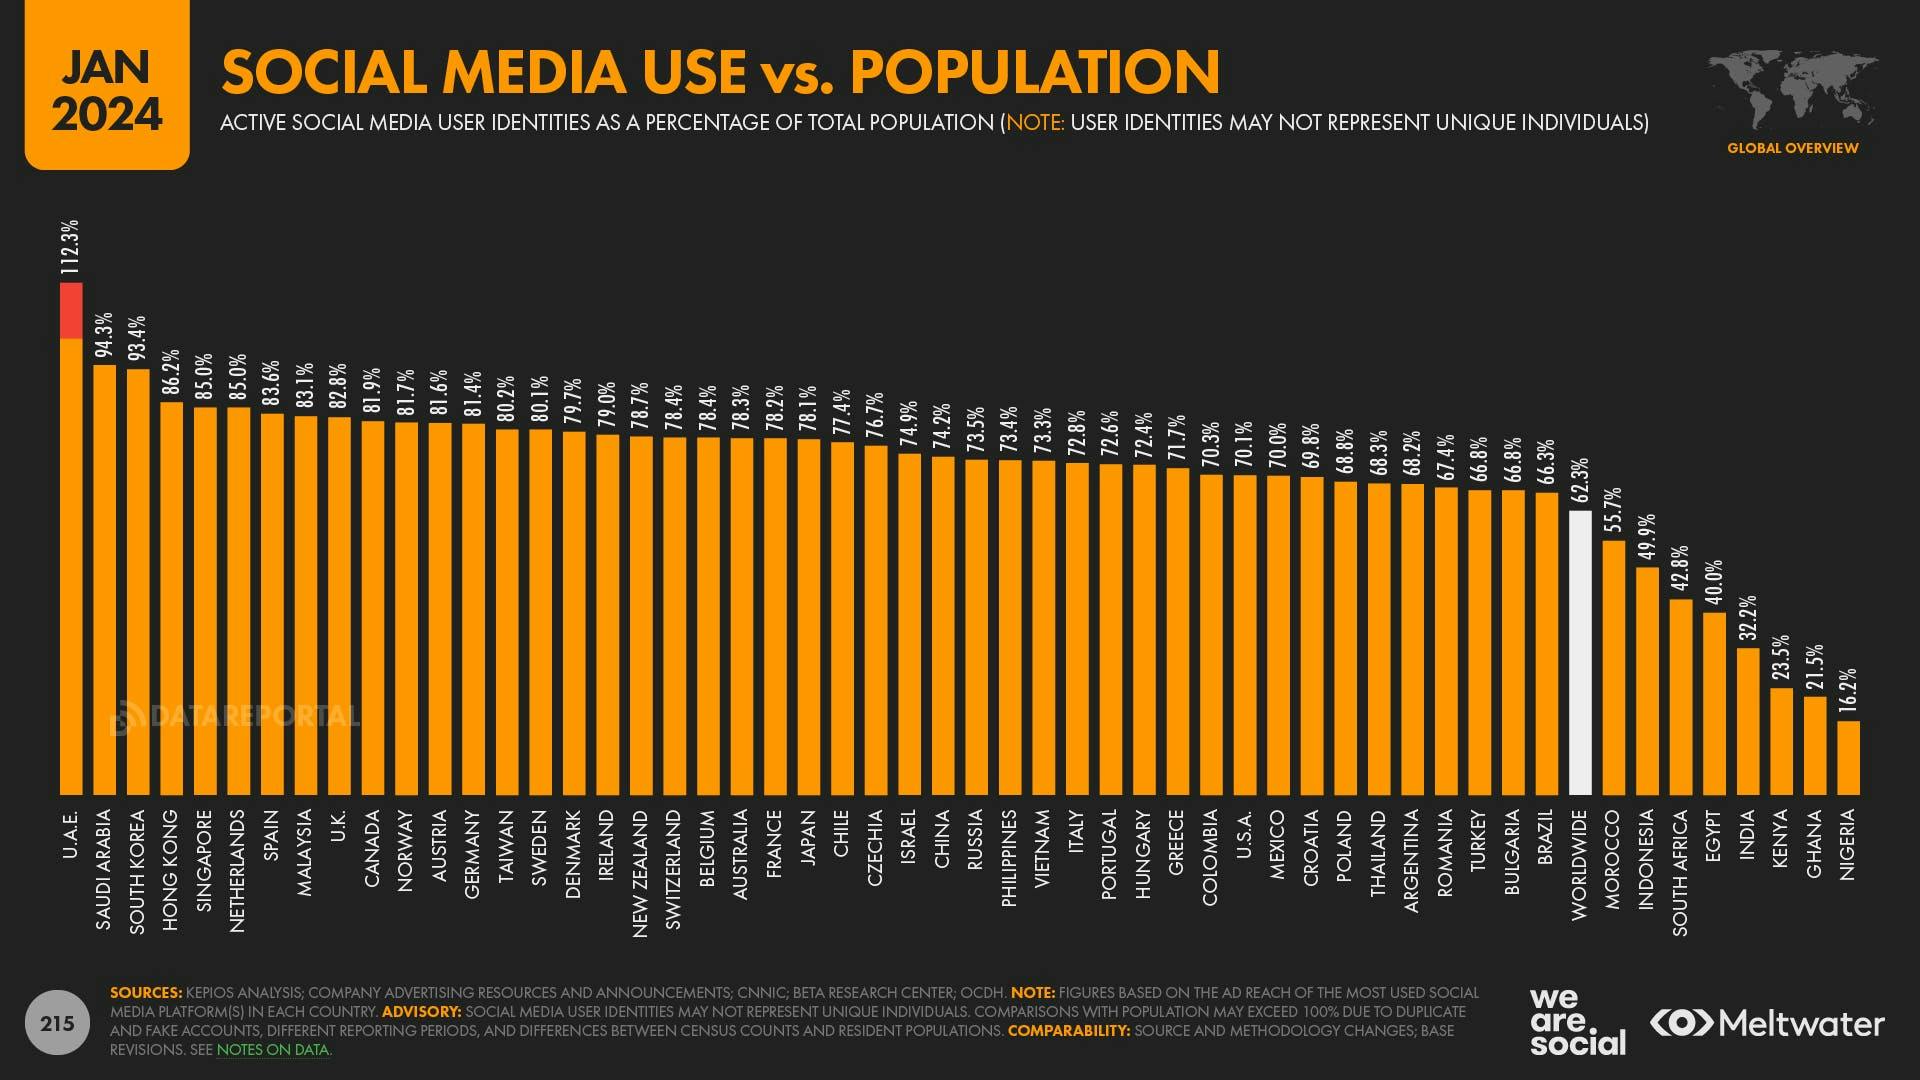 Social media use vs. population by country